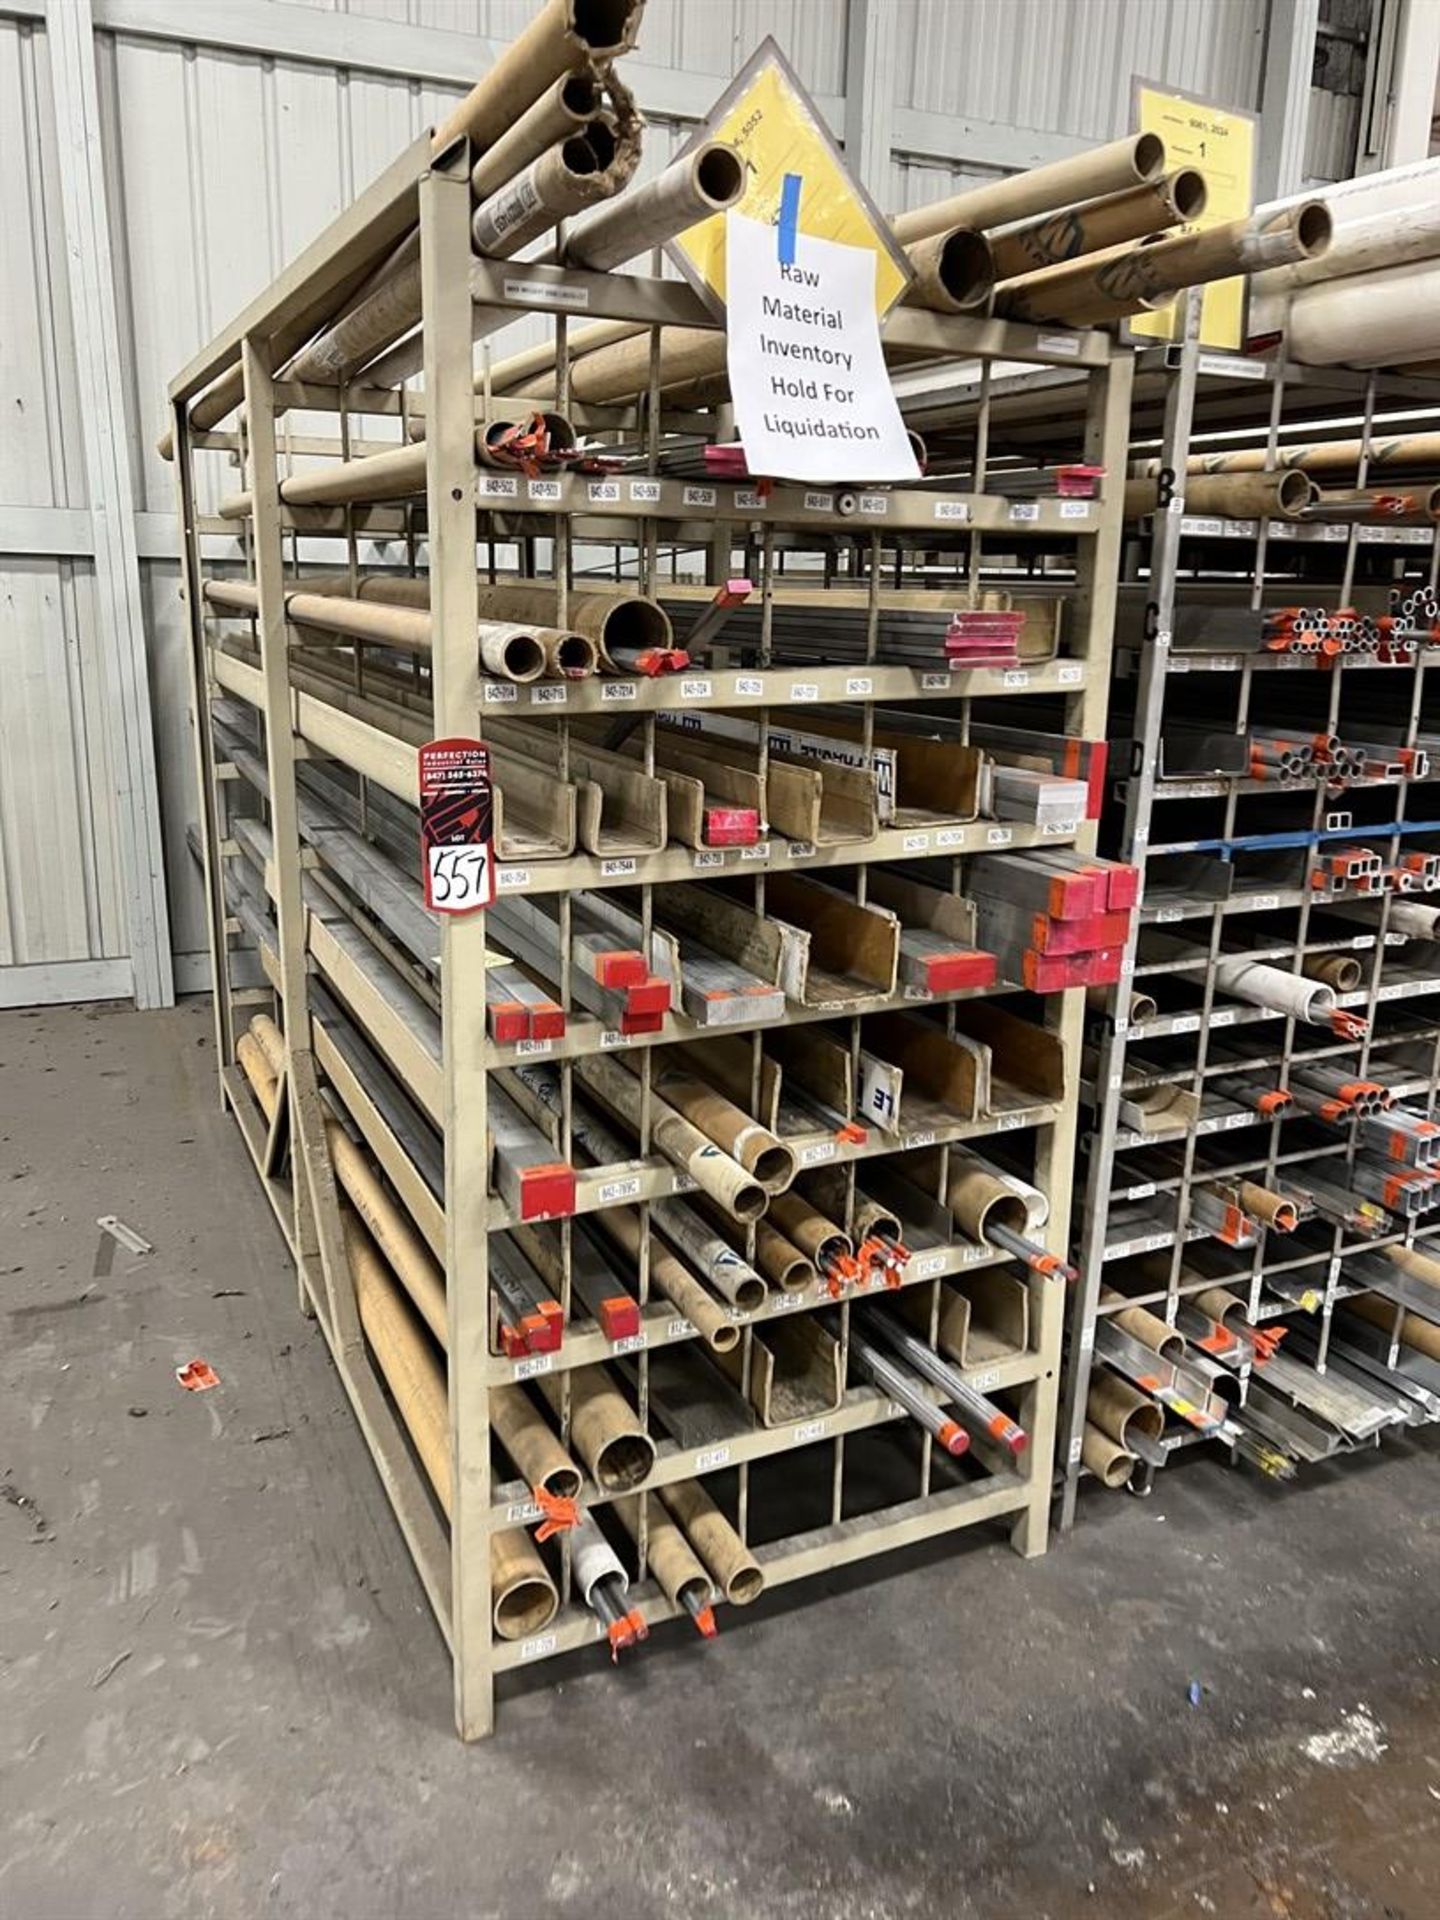 Lot of Stock Racks w/ Assorted Stock Including Aluminum and Steel Flat stock, Round Tubing, and - Image 2 of 7